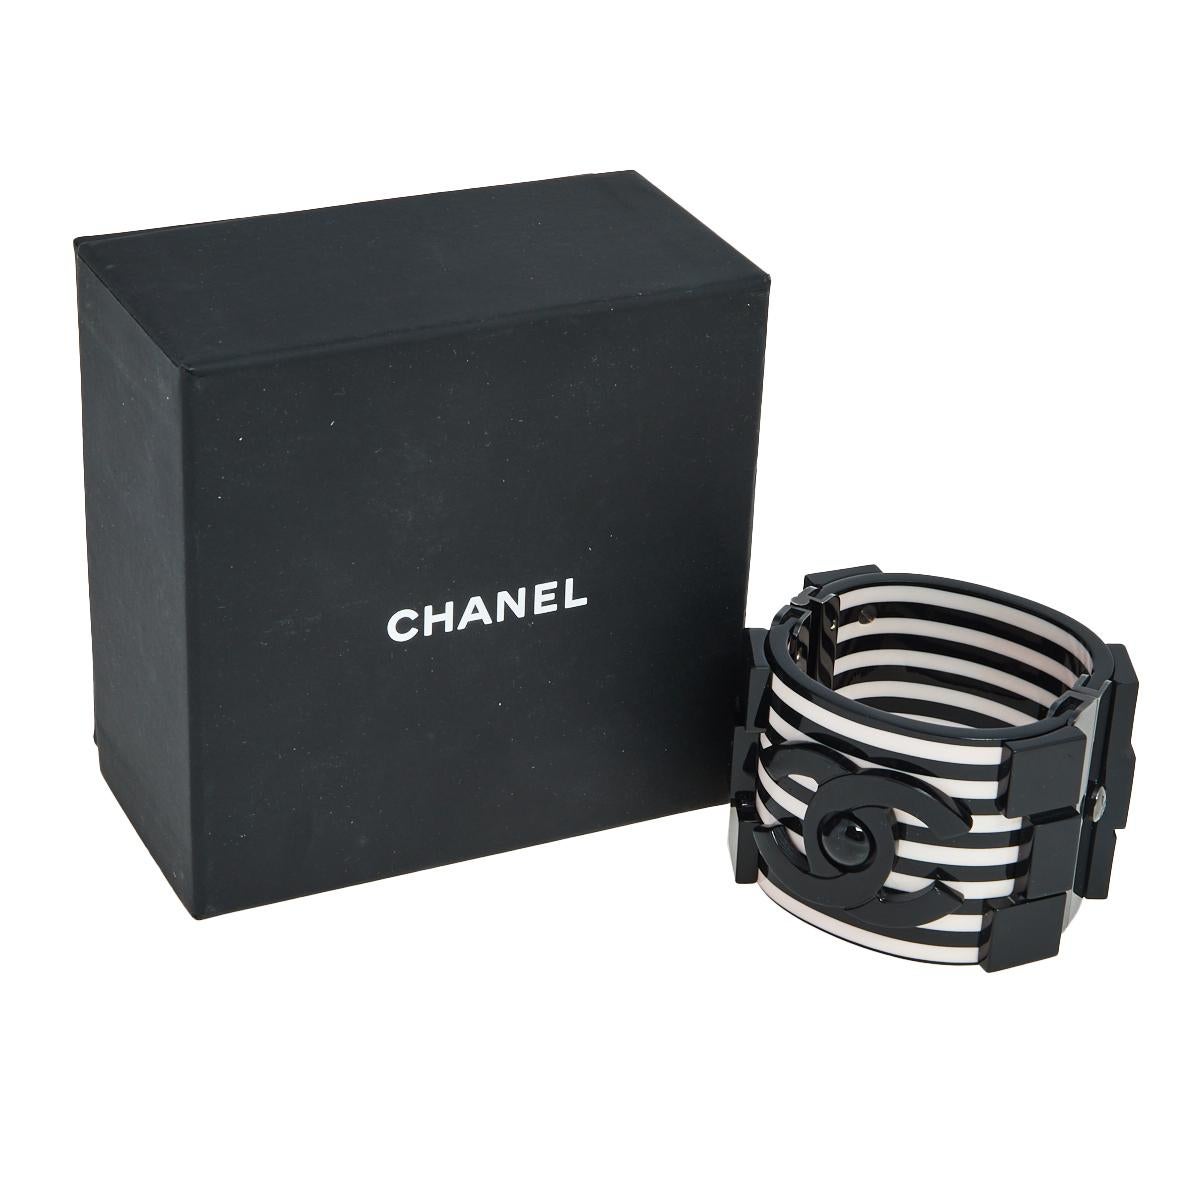 Constructed using black-tone metal and resin in a cuff design, this Chanel bracelet is sure to fit well and look great on your wrist. It comes in its original box.

Includes: Original Box
